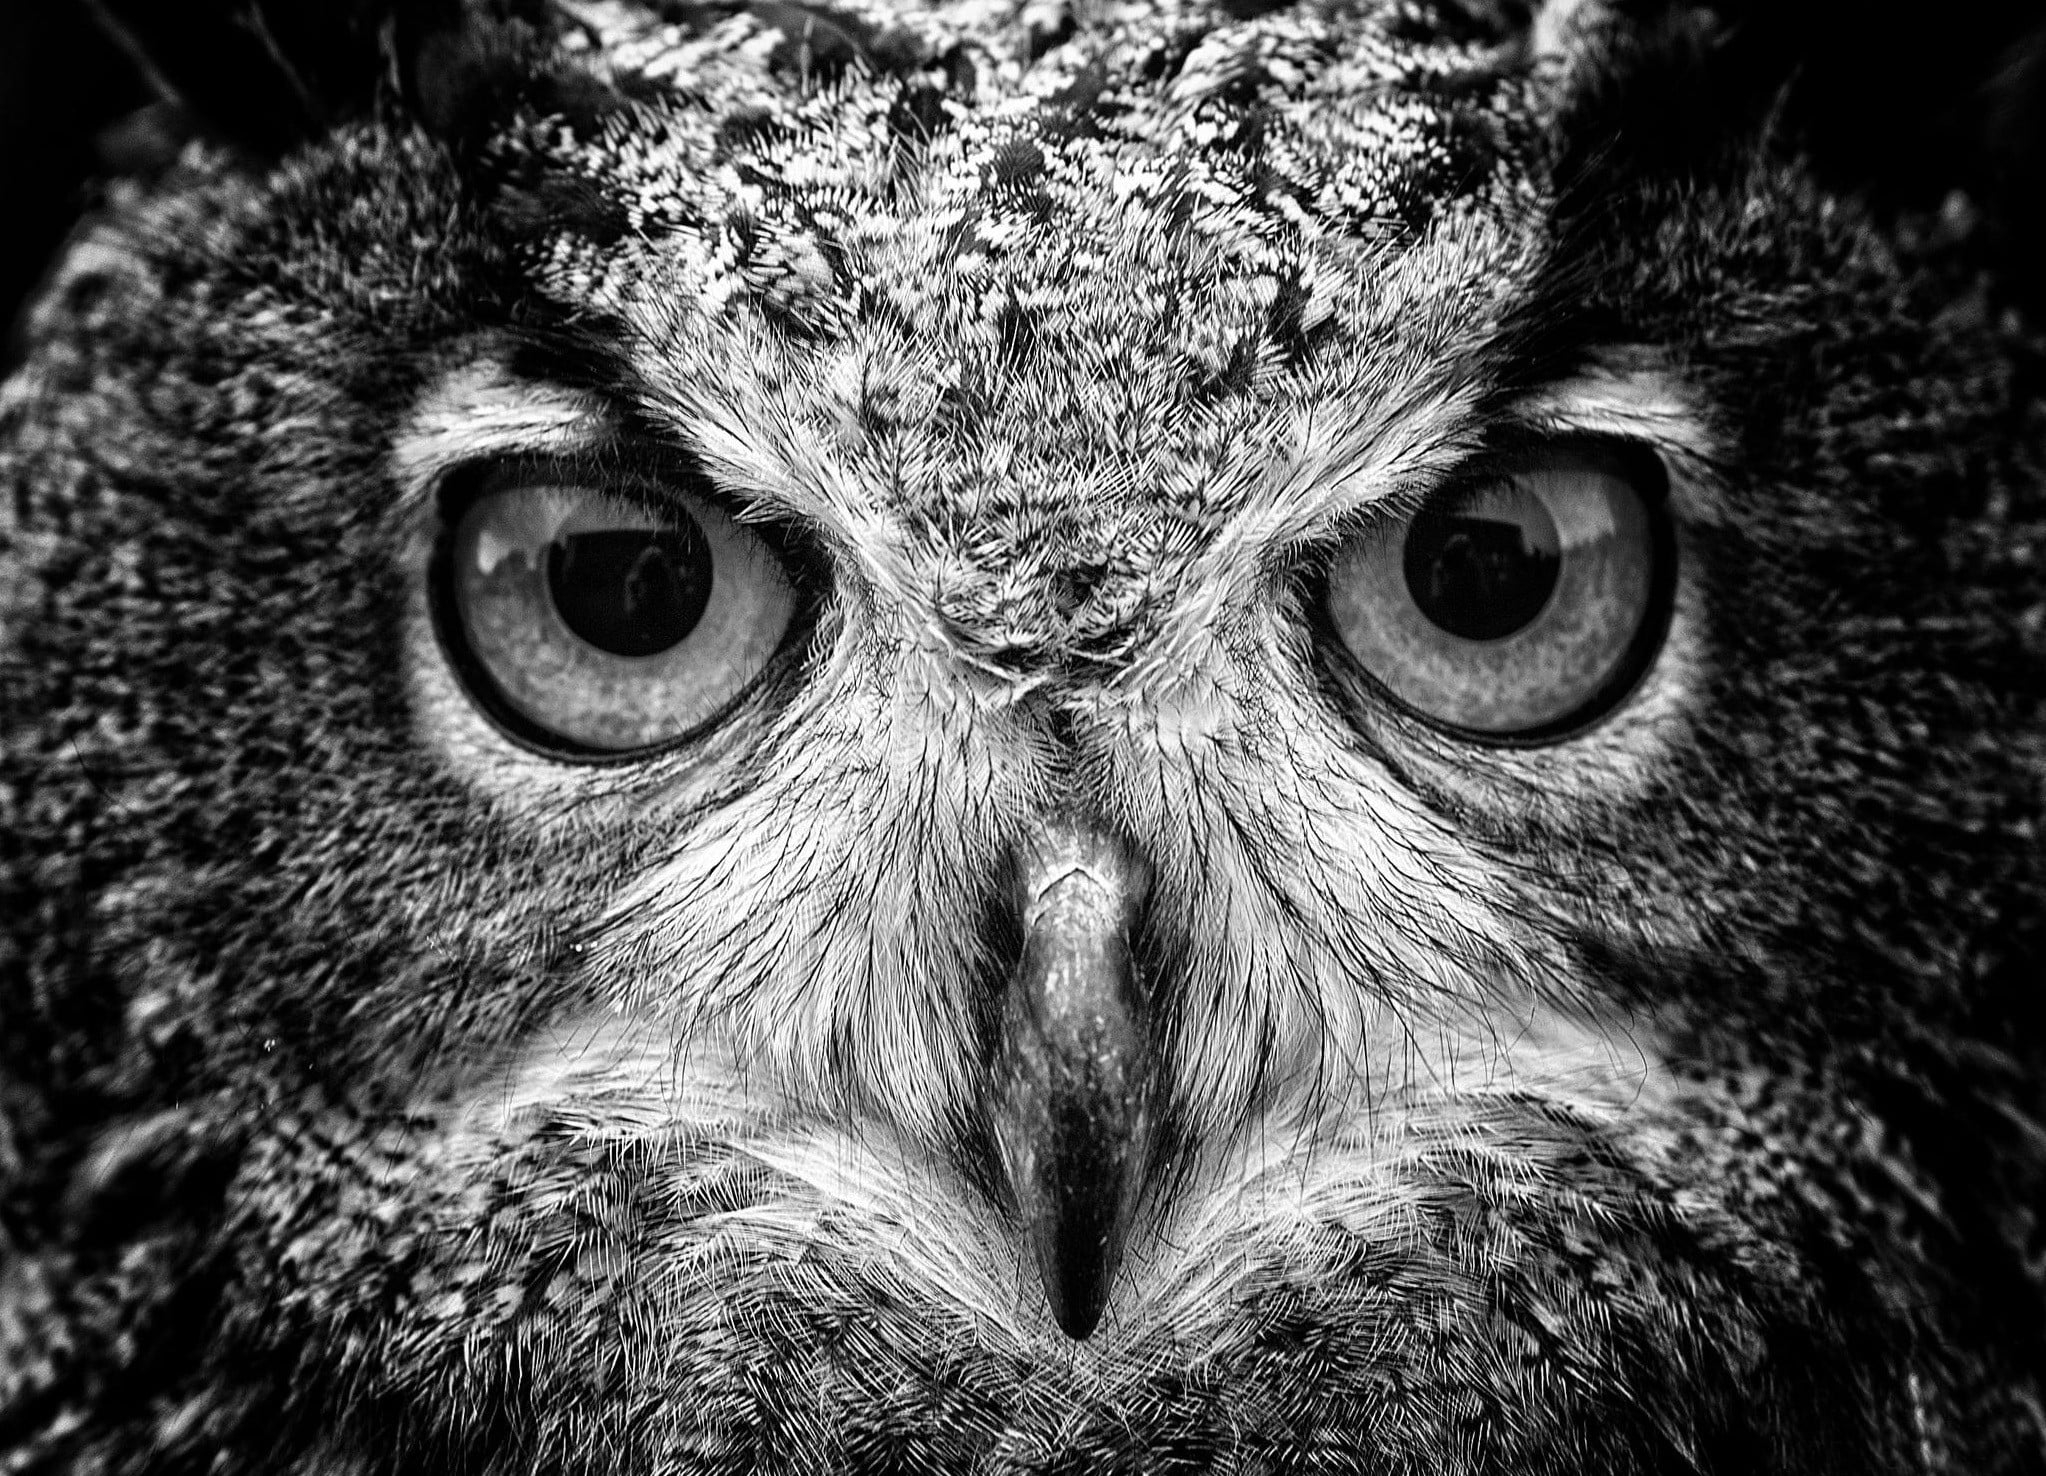 Wallpaper black and gray eagle, grayscale photography of owl, animals